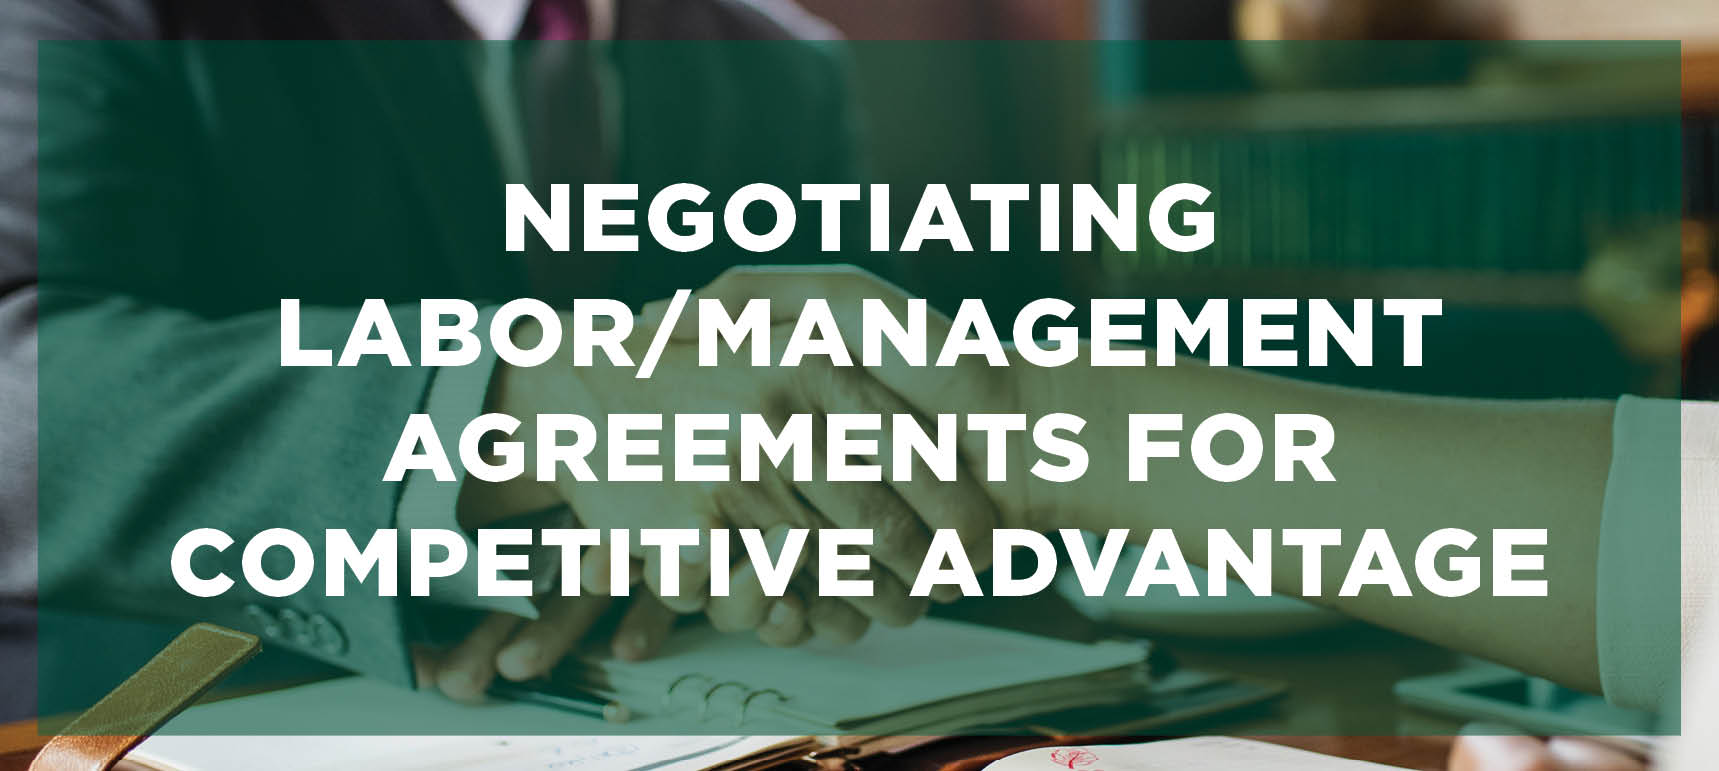 Negotiating Labor/Management Agreements for Competitive Advantage